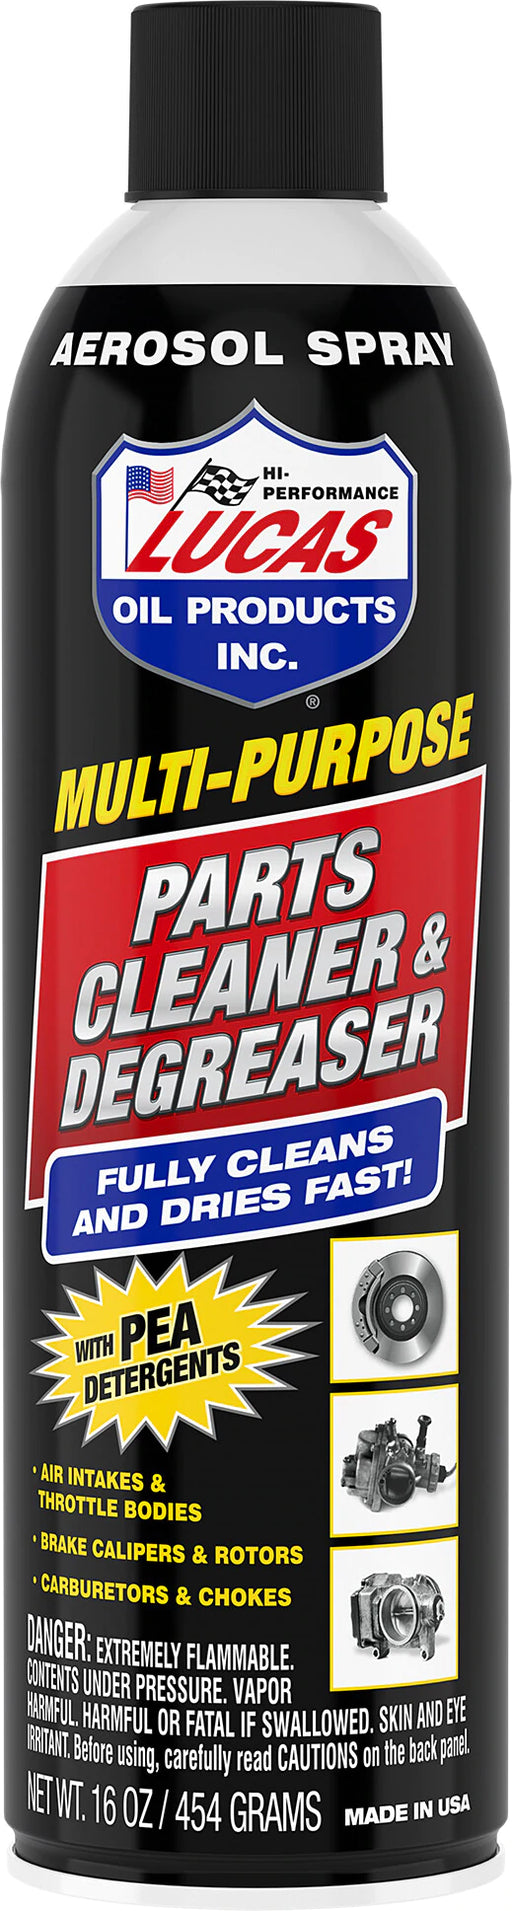 Multi-Purpose Parts Cleaner & Degreaser